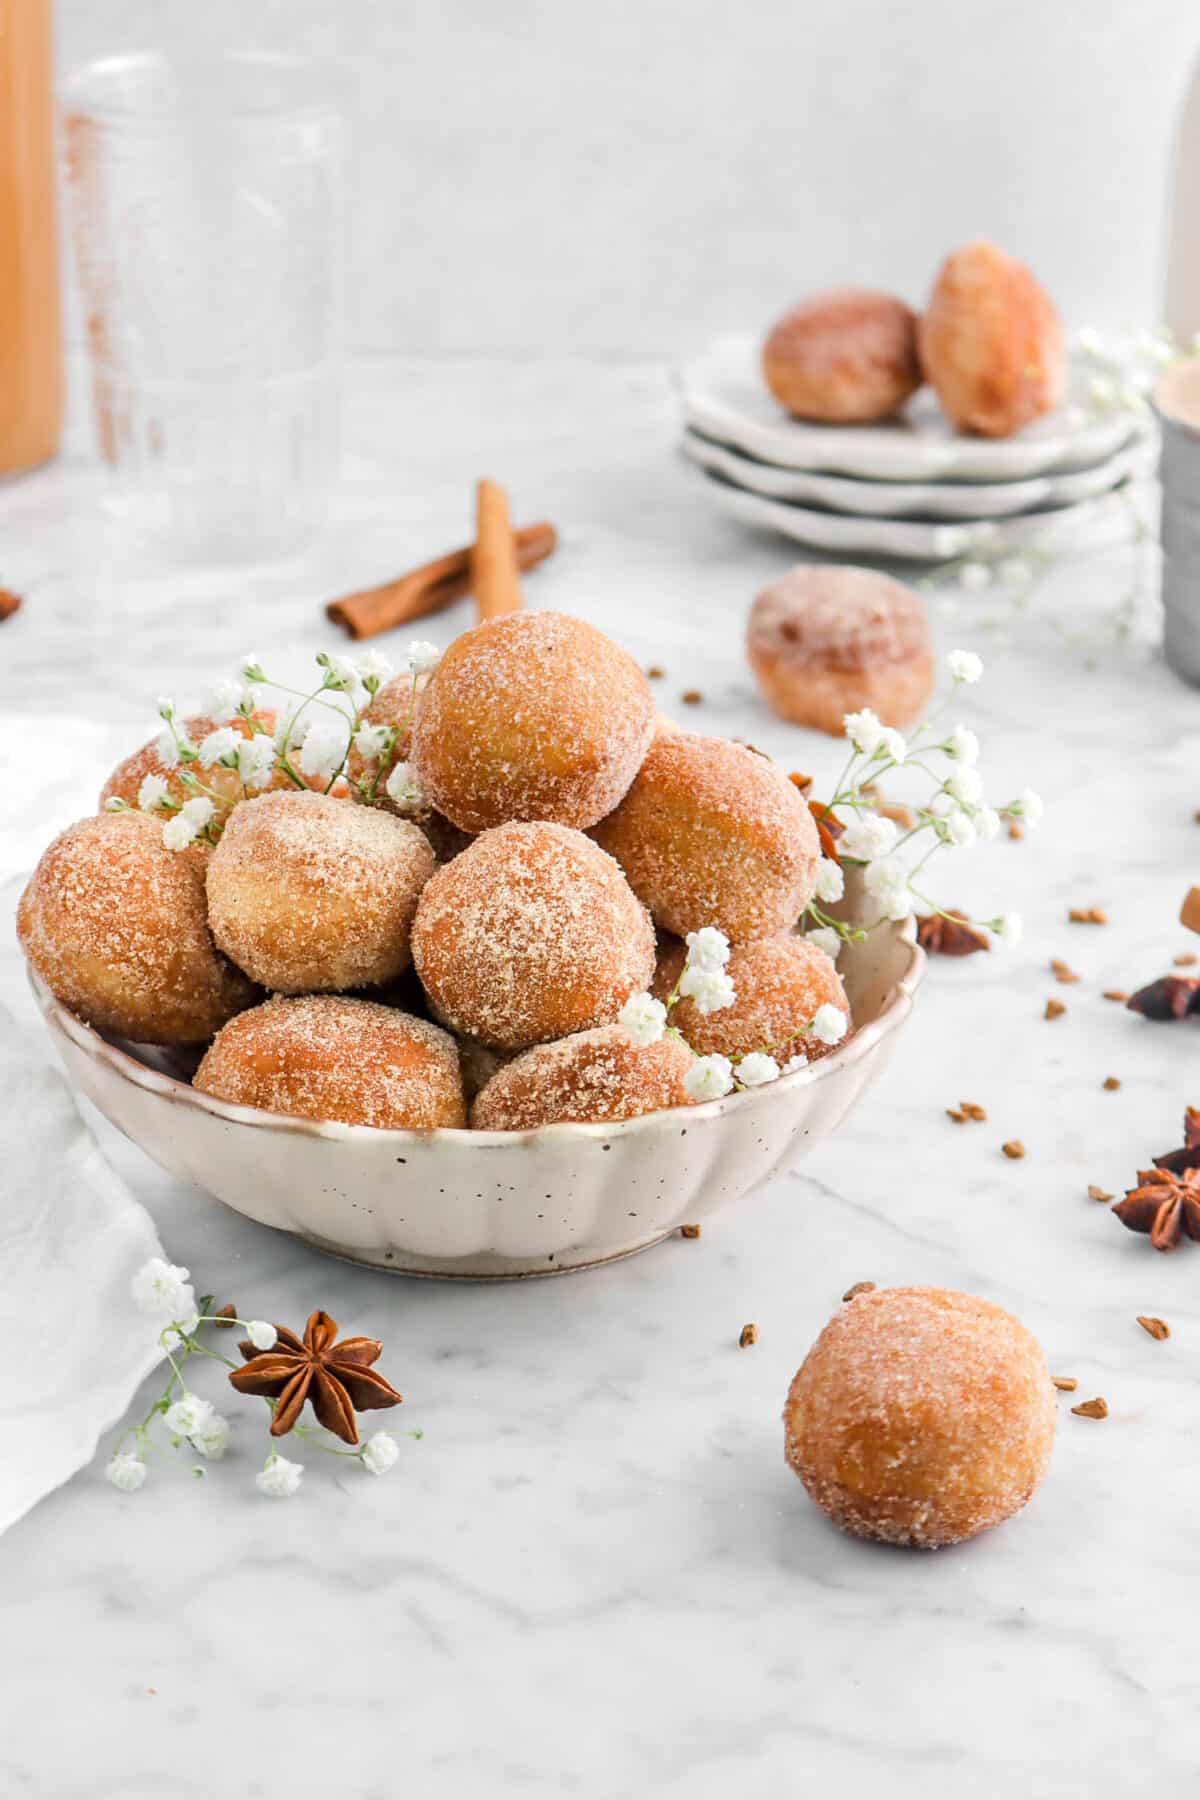 Apple Cider Donut Holes with Spiced Sugar